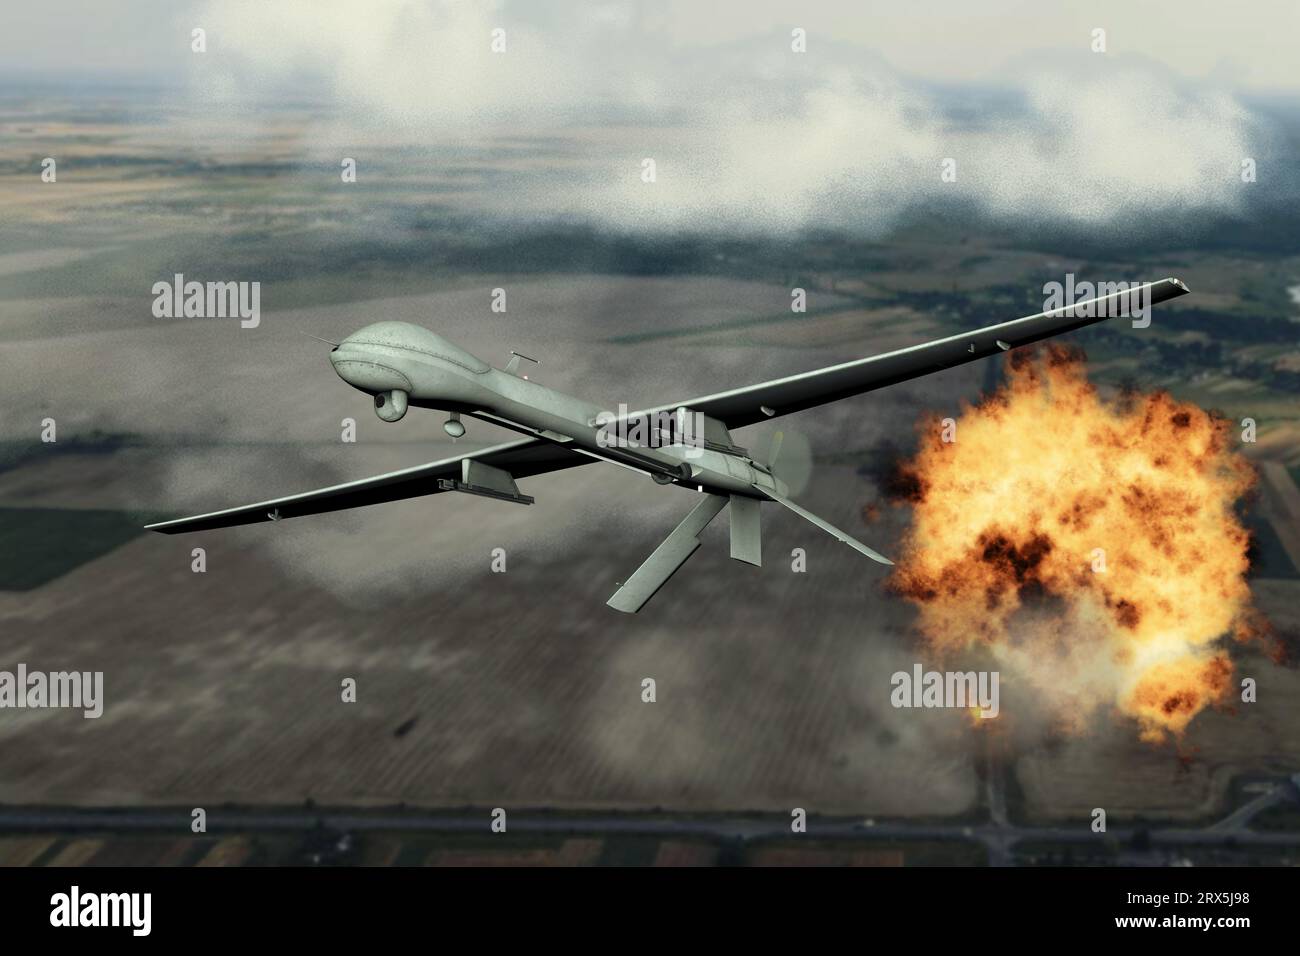 Combat attack drone dropping bombs, blowing up military facilities, flying in the clouds, aerial view, explosion of fire and smoke, war in Ukraine, Stock Photo